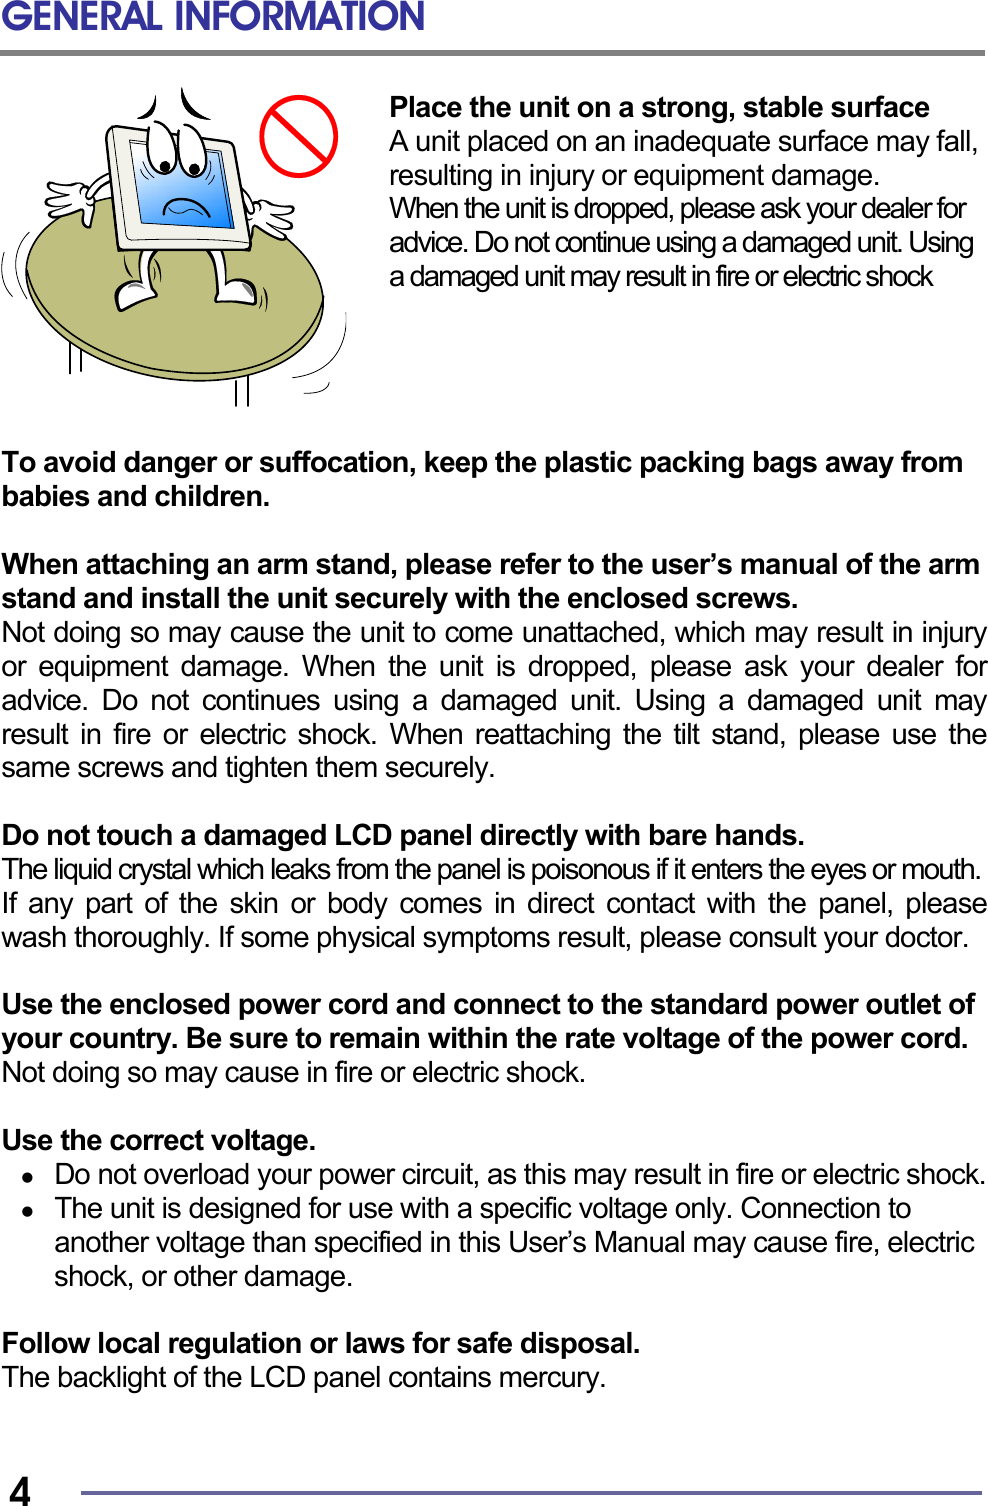 GENERAL INFORMATION   4 Place the unit on a strong, stable surface A unit placed on an inadequate surface may fall, resulting in injury or equipment damage. When the unit is dropped, please ask your dealer for advice. Do not continue using a damaged unit. Using a damaged unit may result in fire or electric shock      To avoid danger or suffocation, keep the plastic packing bags away from babies and children.  When attaching an arm stand, please refer to the user’s manual of the arm stand and install the unit securely with the enclosed screws. Not doing so may cause the unit to come unattached, which may result in injury or equipment damage. When the unit is dropped, please ask your dealer for advice. Do not continues using a damaged unit. Using a damaged unit may result in fire or electric shock. When reattaching the tilt stand, please use the same screws and tighten them securely.  Do not touch a damaged LCD panel directly with bare hands. The liquid crystal which leaks from the panel is poisonous if it enters the eyes or mouth.  If any part of the skin or body comes in direct contact with the panel, please wash thoroughly. If some physical symptoms result, please consult your doctor.  Use the enclosed power cord and connect to the standard power outlet of your country. Be sure to remain within the rate voltage of the power cord. Not doing so may cause in fire or electric shock.  Use the correct voltage.   Do not overload your power circuit, as this may result in fire or electric shock.   The unit is designed for use with a specific voltage only. Connection to another voltage than specified in this User’s Manual may cause fire, electric shock, or other damage.  Follow local regulation or laws for safe disposal. The backlight of the LCD panel contains mercury.   